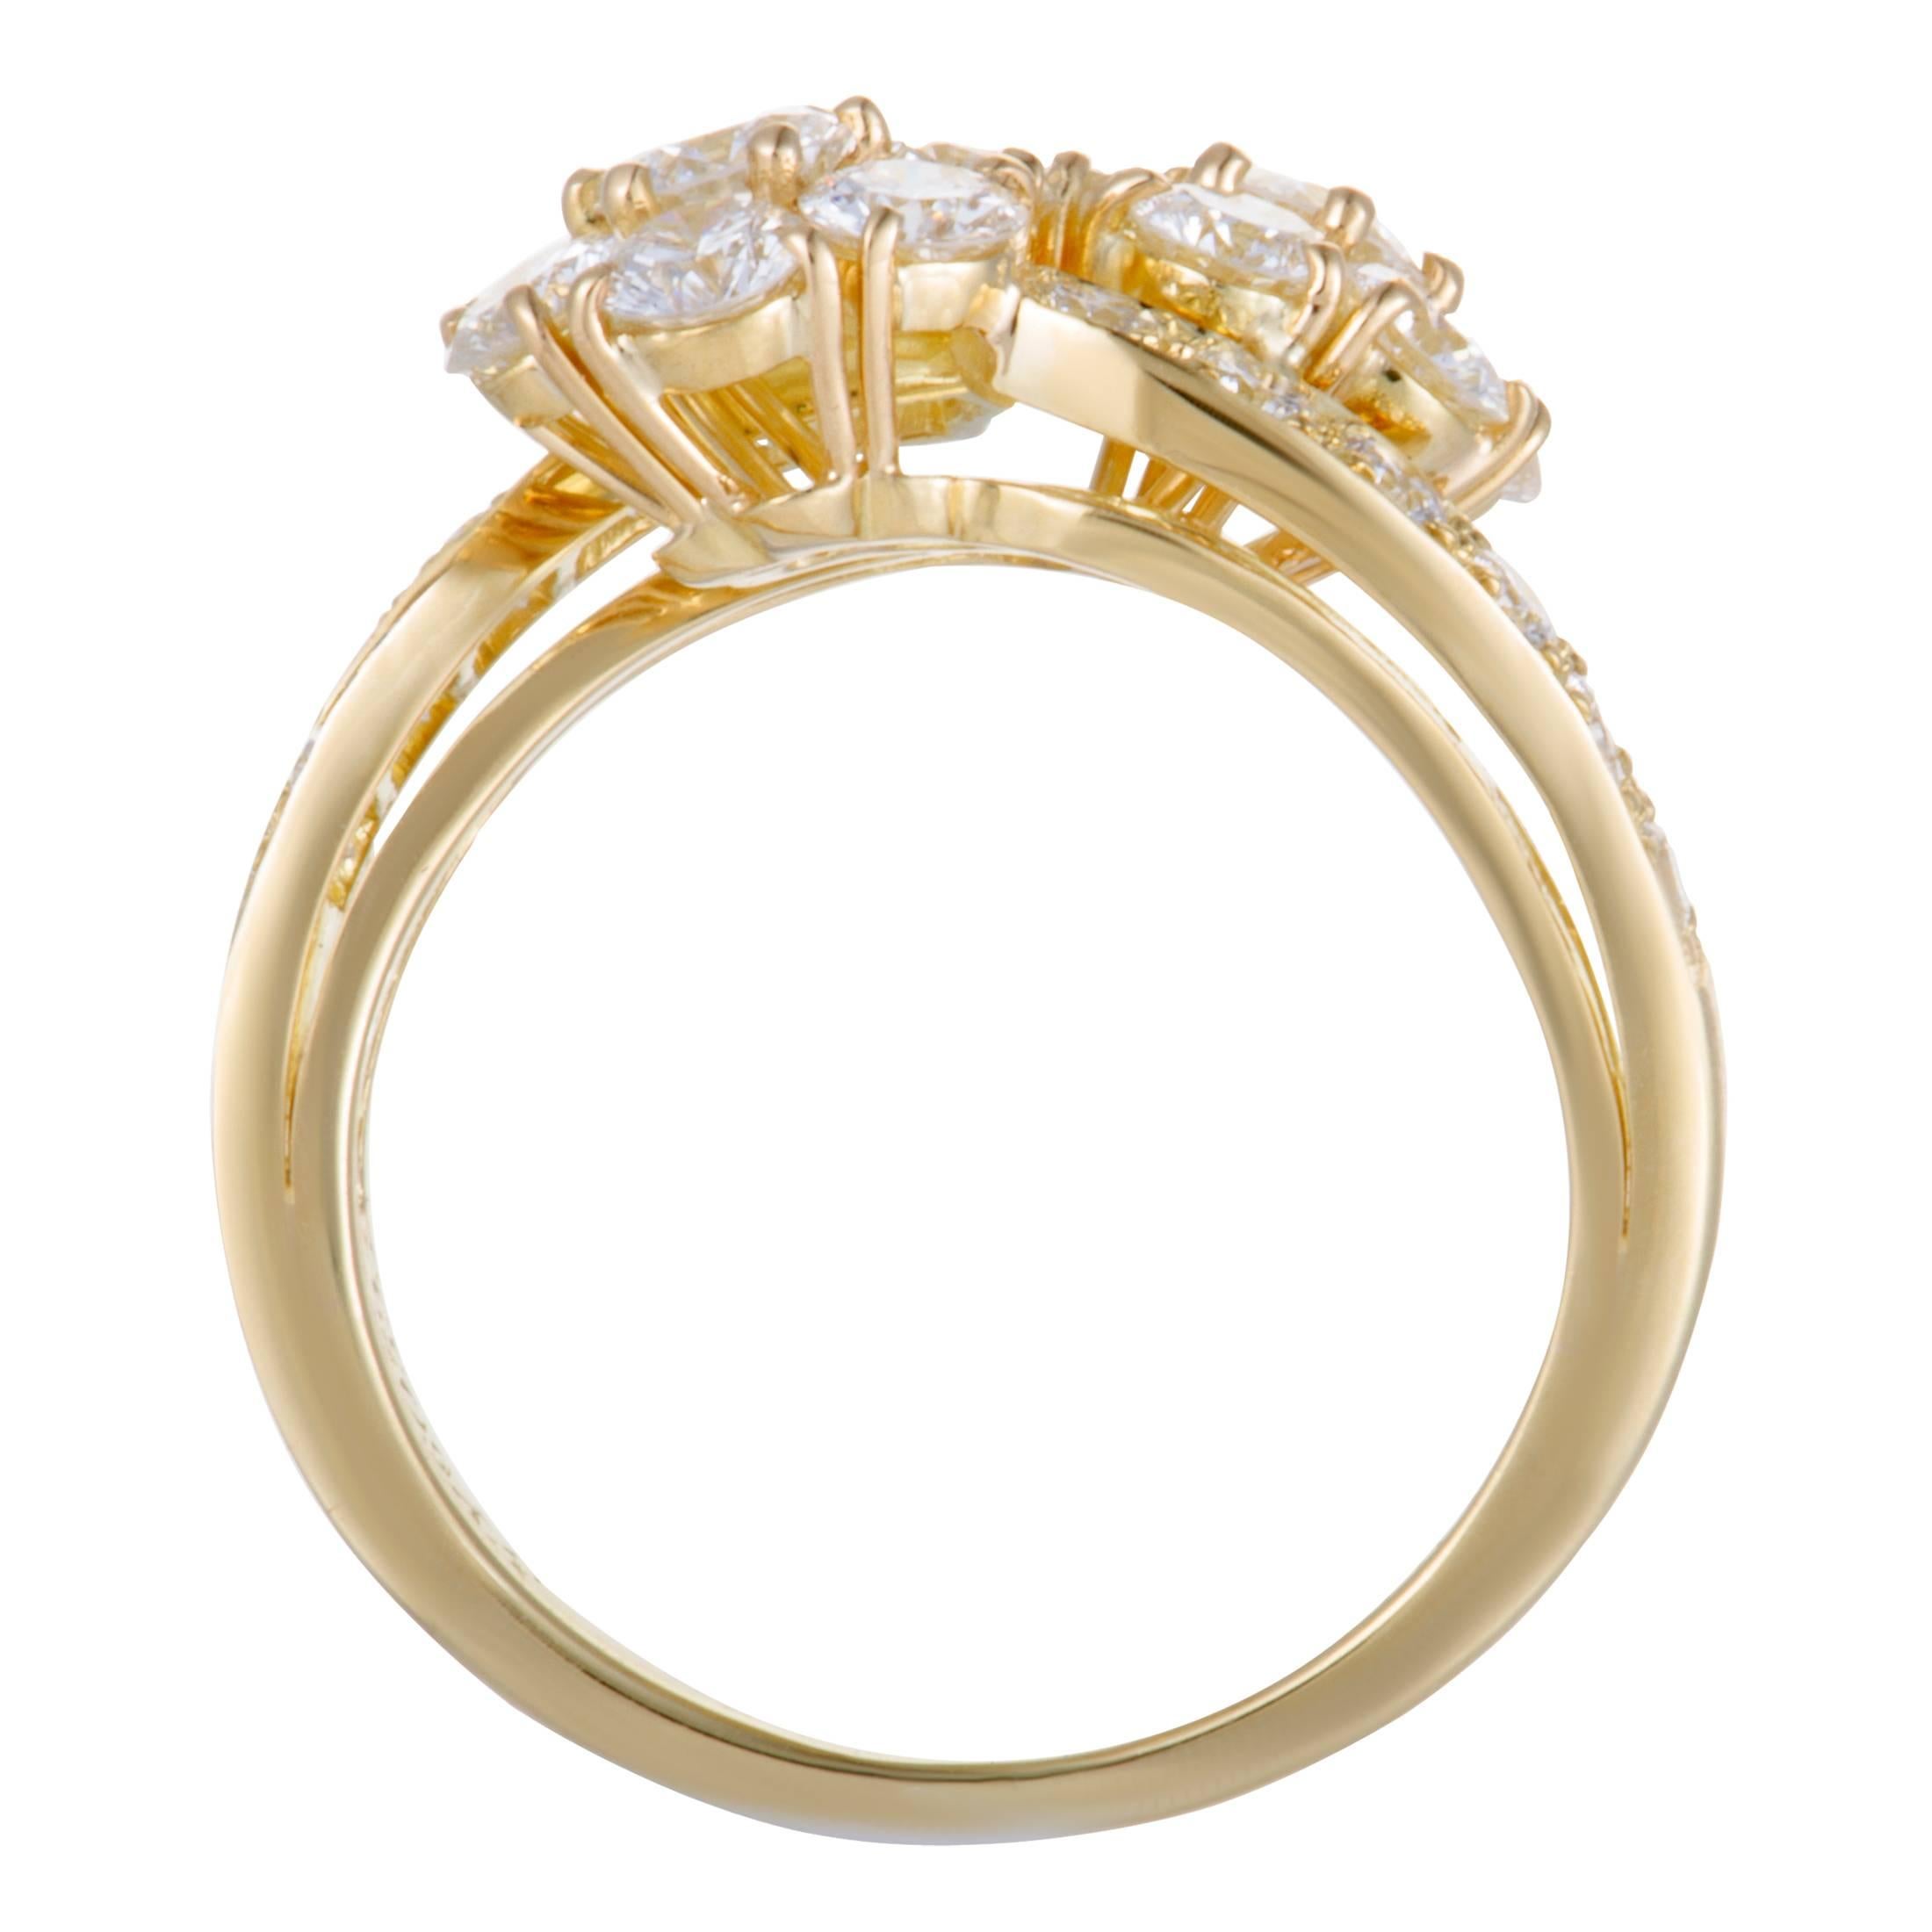 This fascinating ring by Van Cleef & Arpels is an item of prestigious quality and refined aesthetic style. The fabulous shimmer of 18K yellow gold in its design is perfectly complemented with the timeless resplendence of  diamonds, weighing